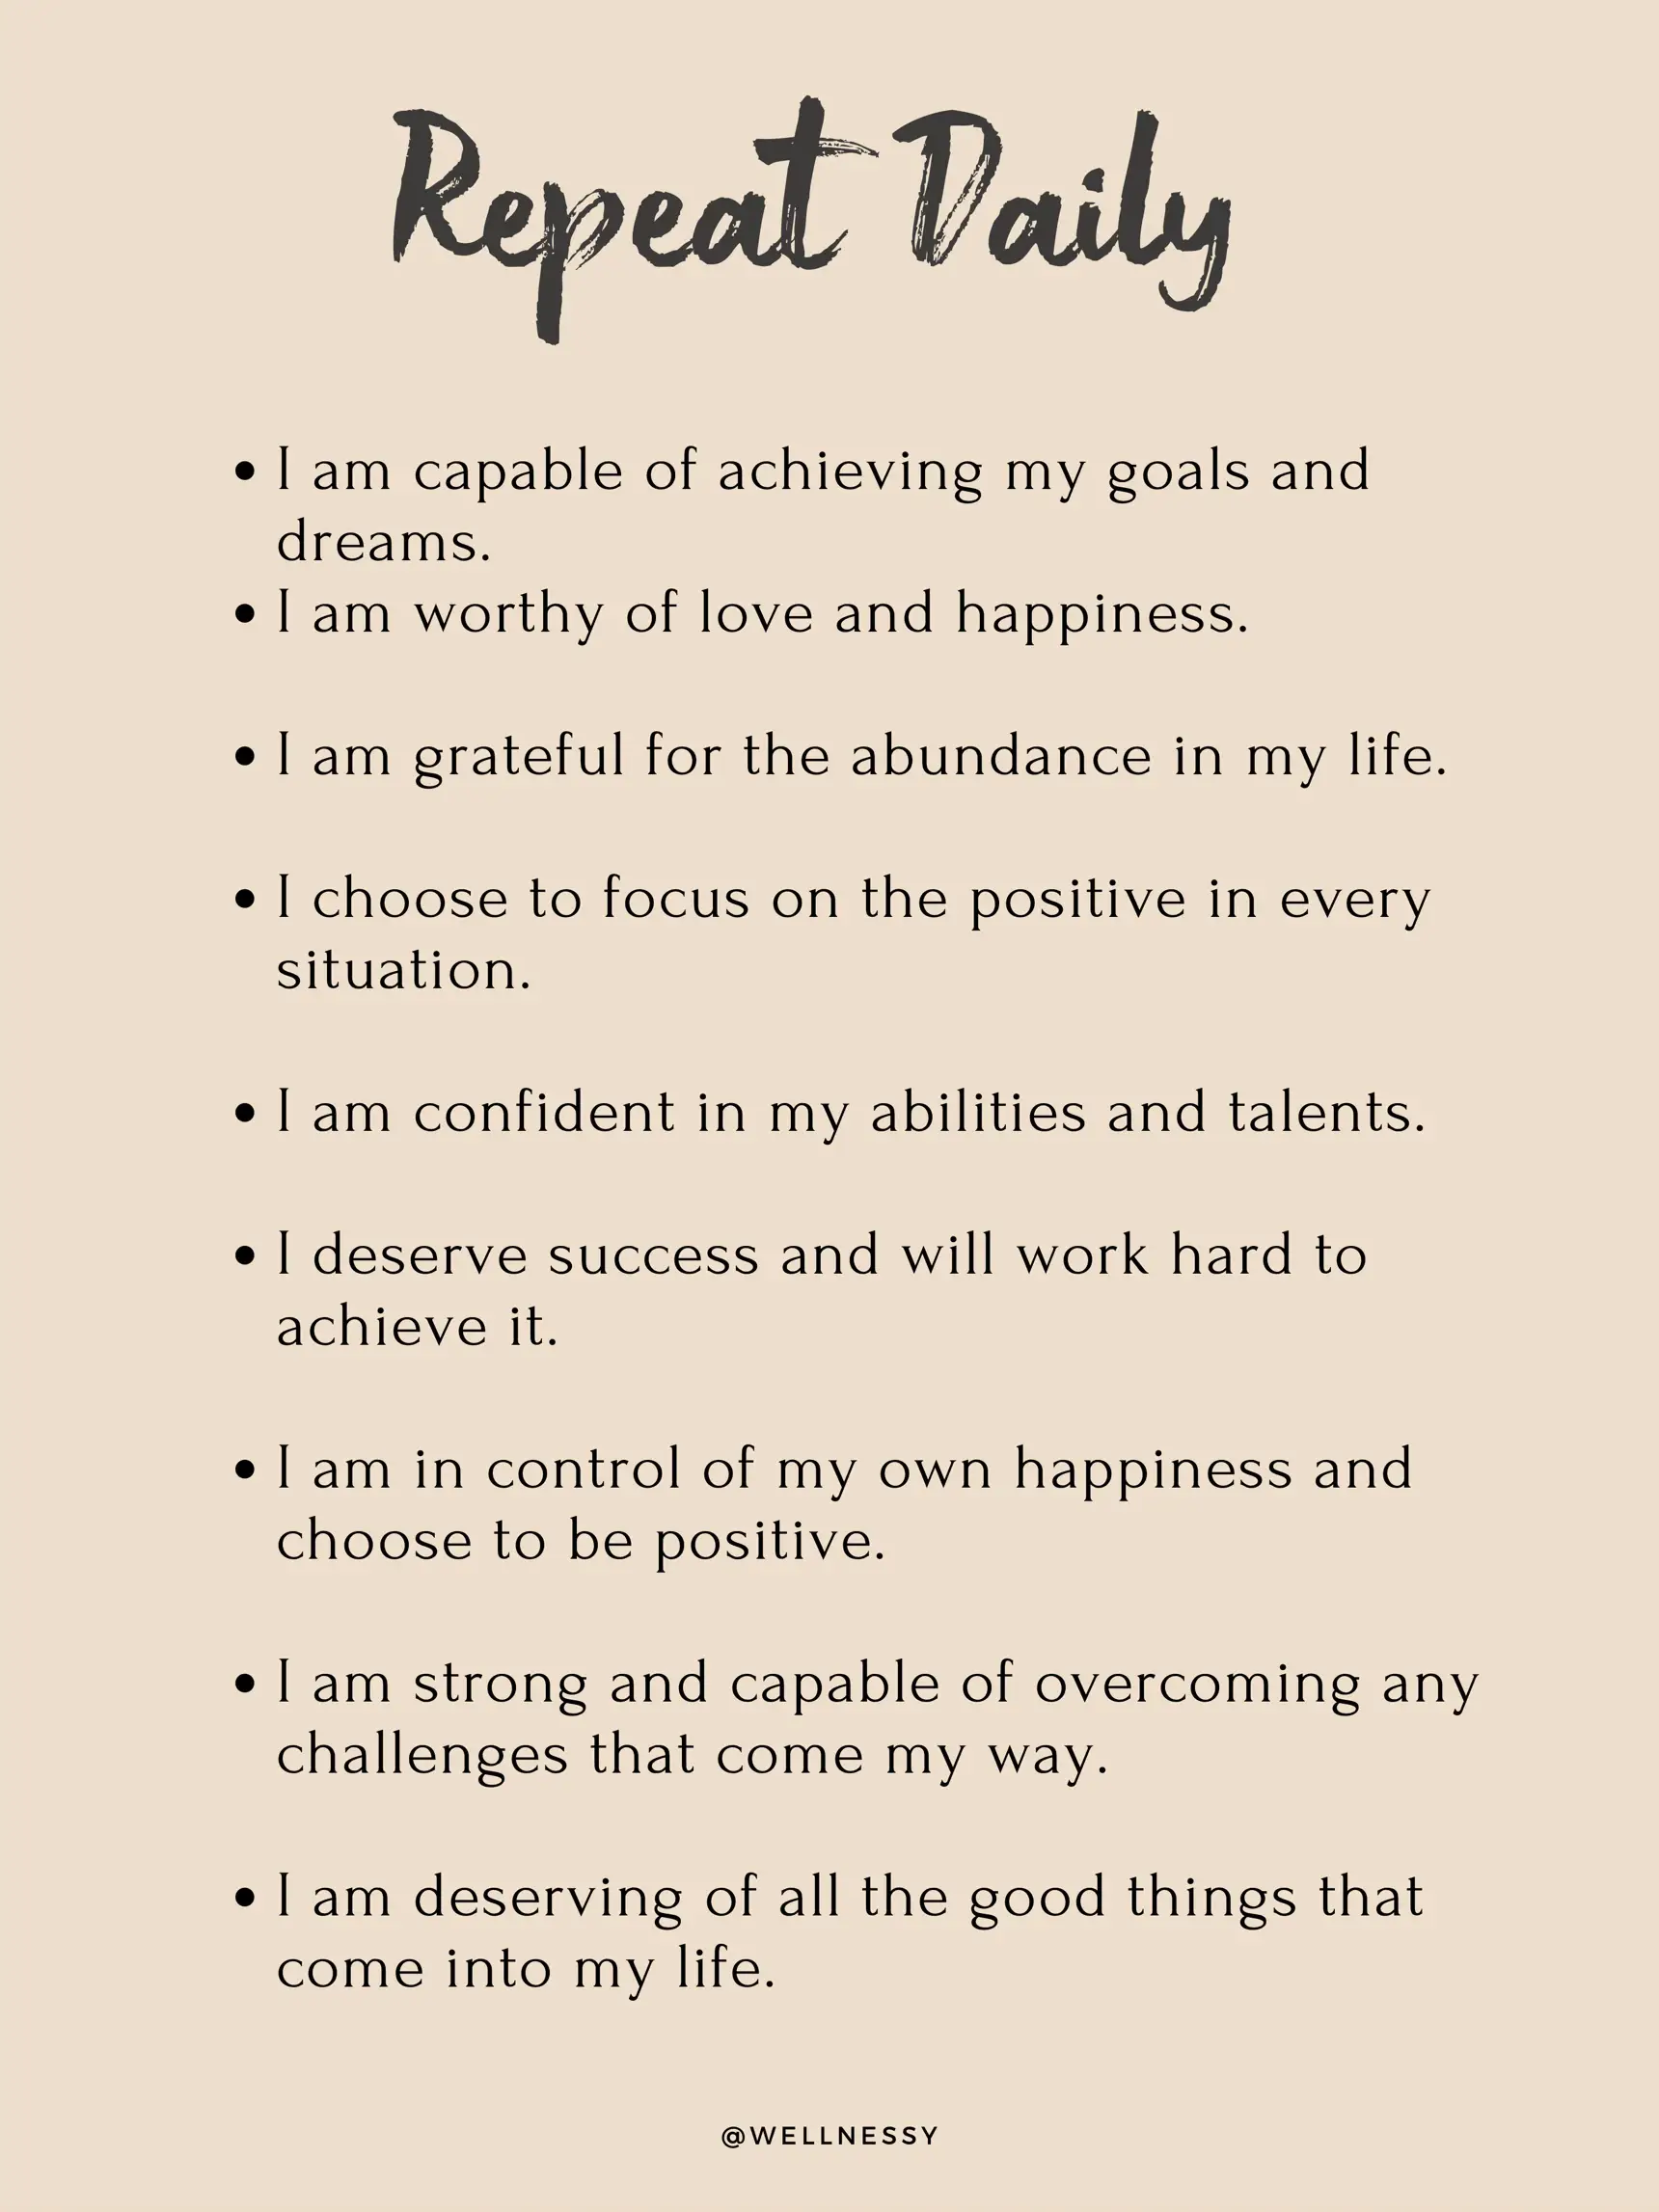 ✨🌟DAILY AFFIRMATIONS🌟's images(0)